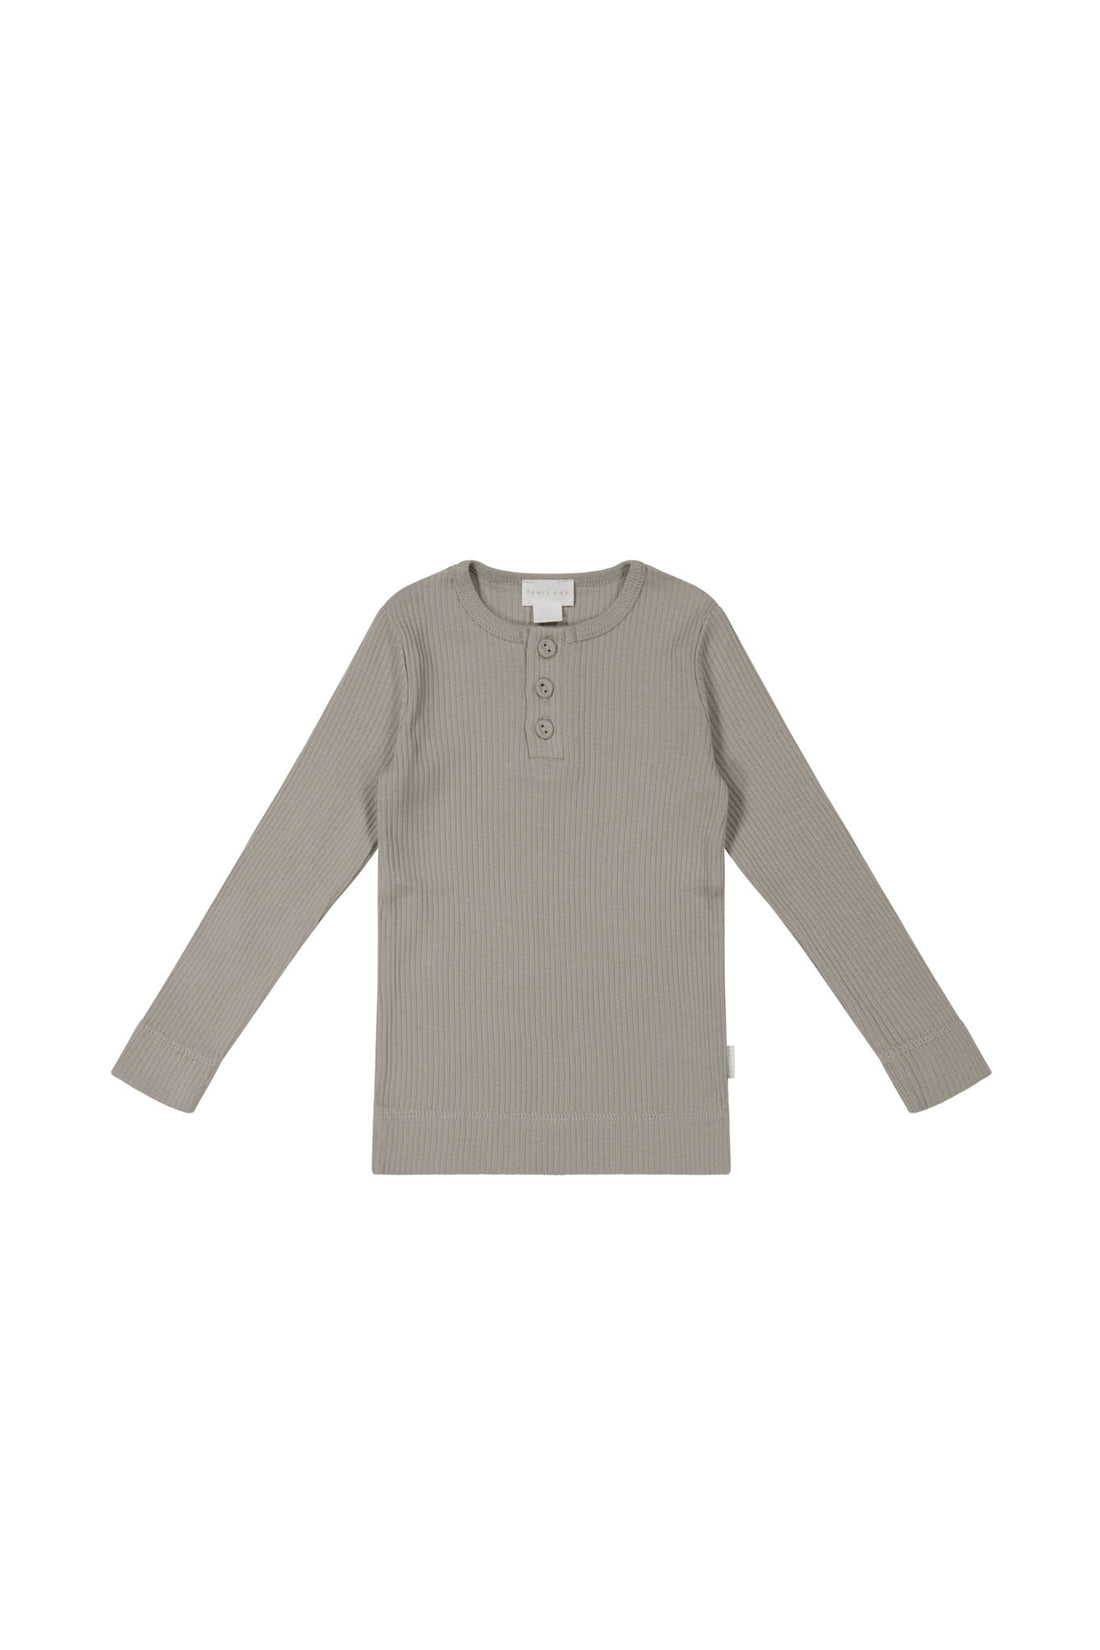 Organic Cotton Modal Long Sleeve Henley - Milford Childrens Top from Jamie Kay NZ